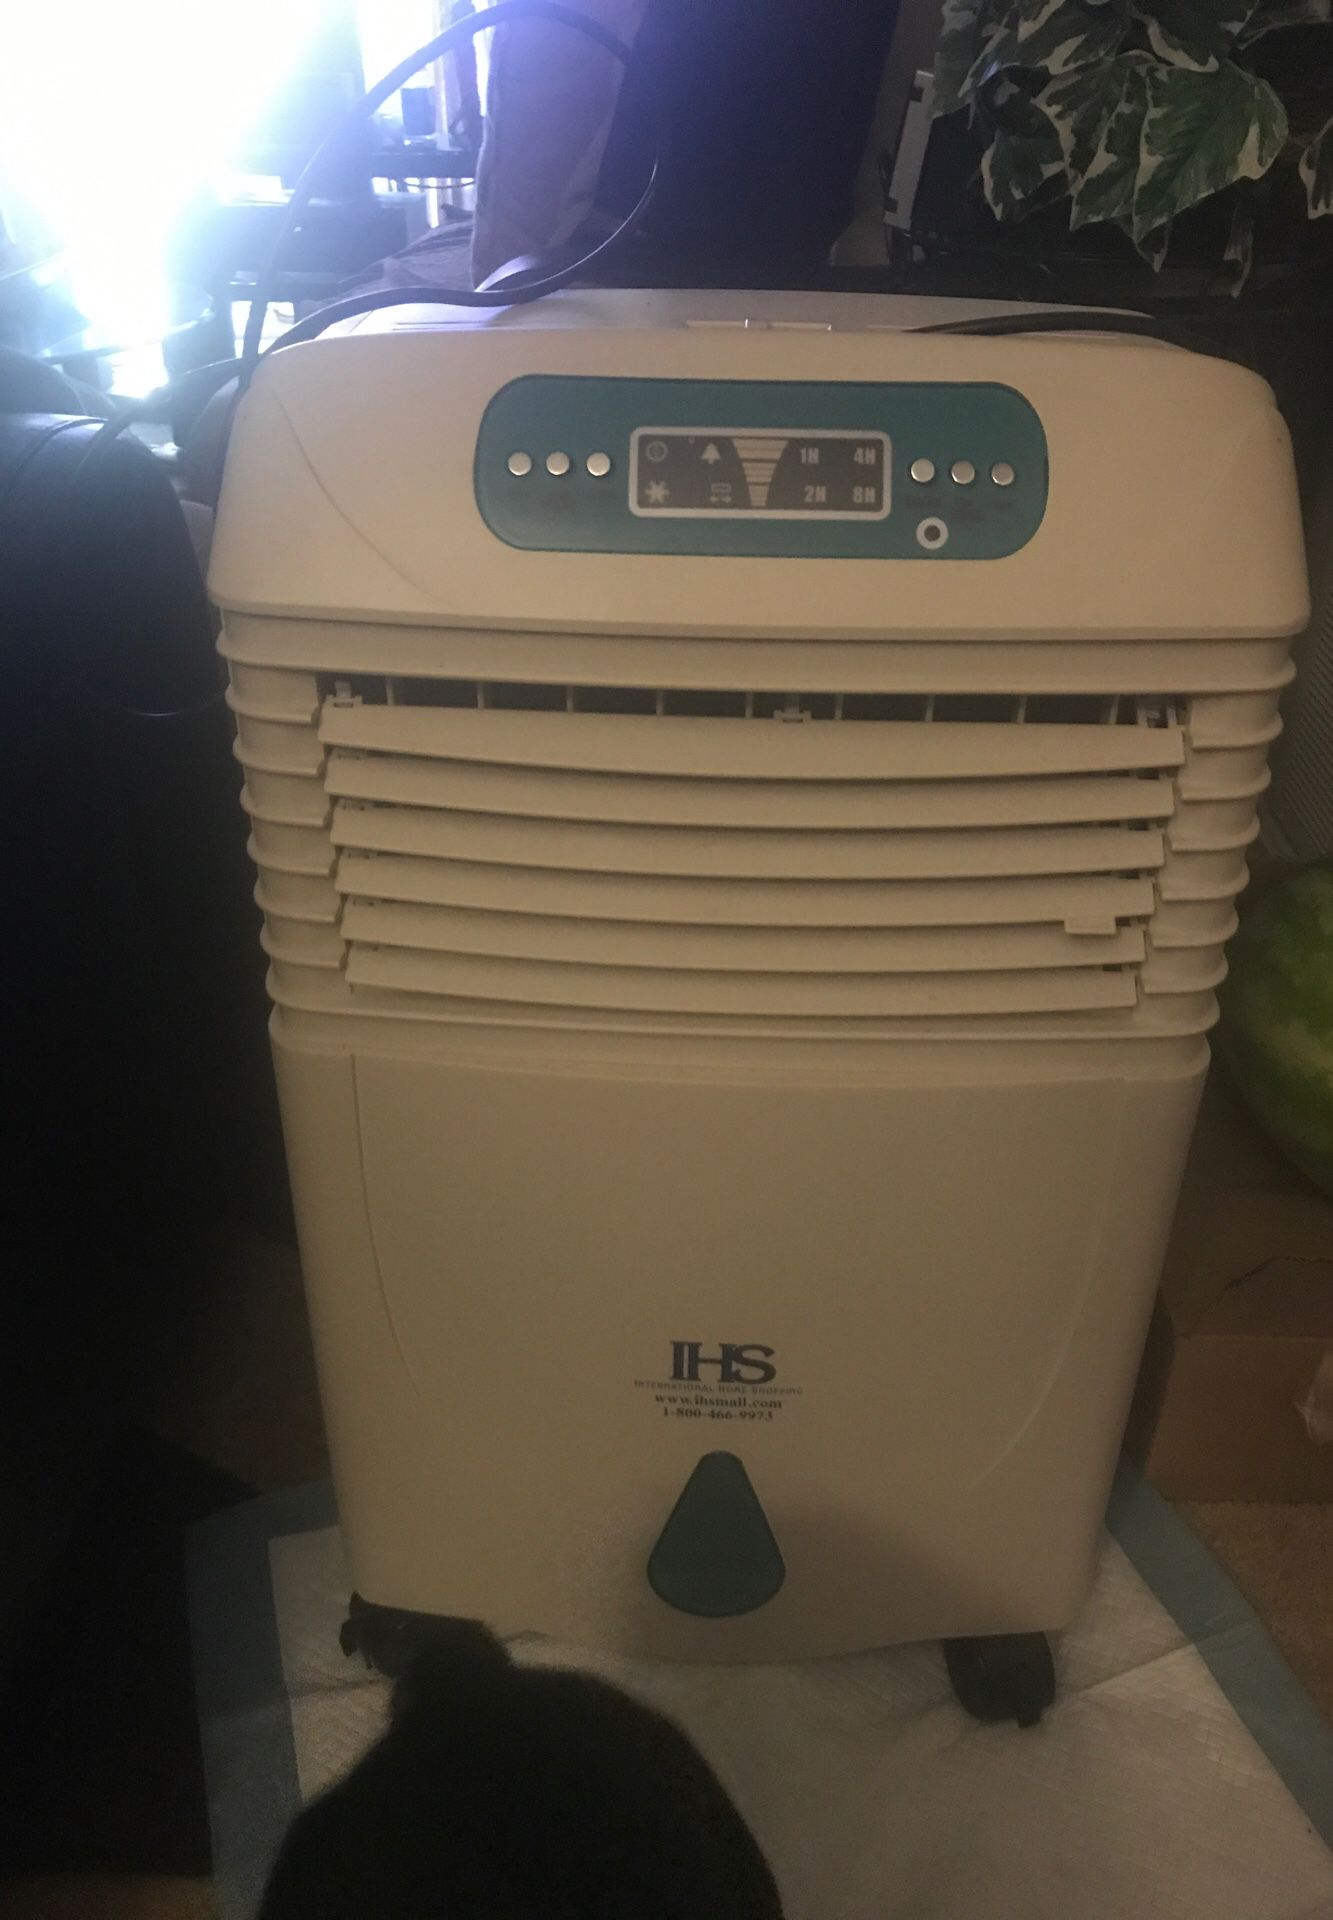 Humidifier for sell 100.00 or best offer